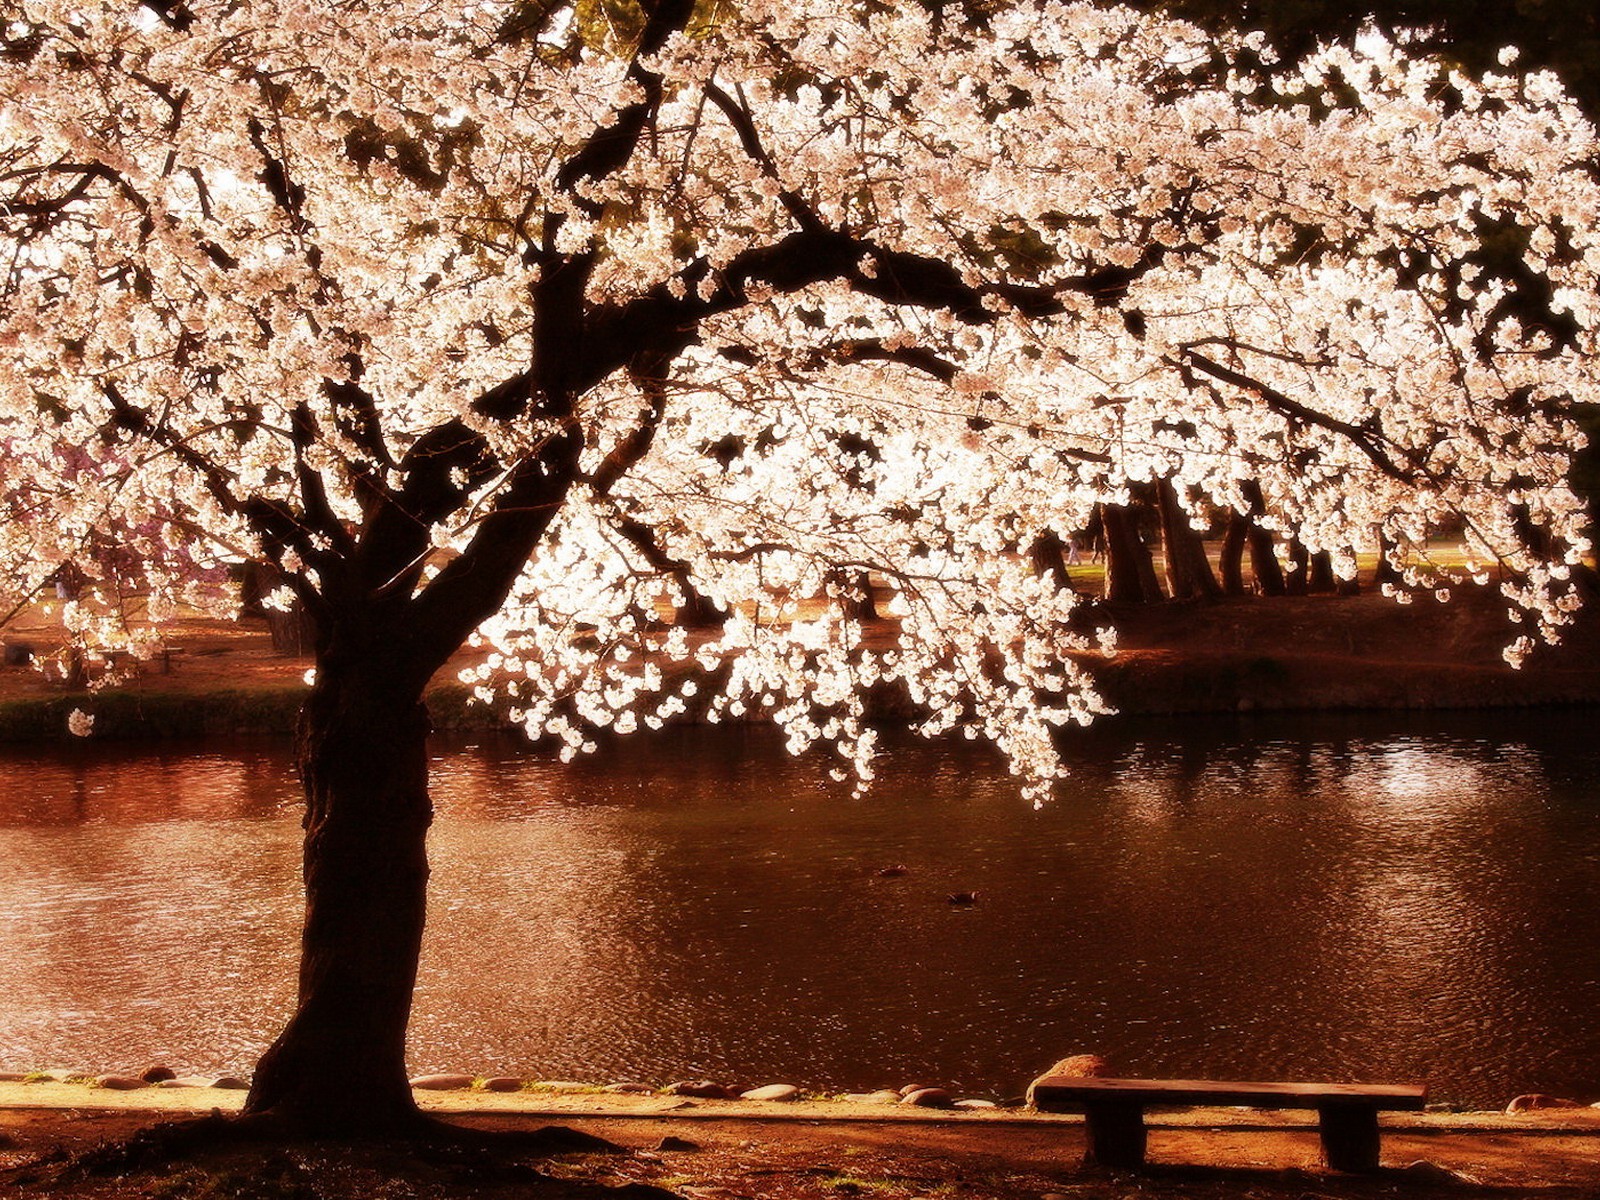 cherry, Blossoms, Trees, Night, Flowers, Blossoms, Rivers, Reflections